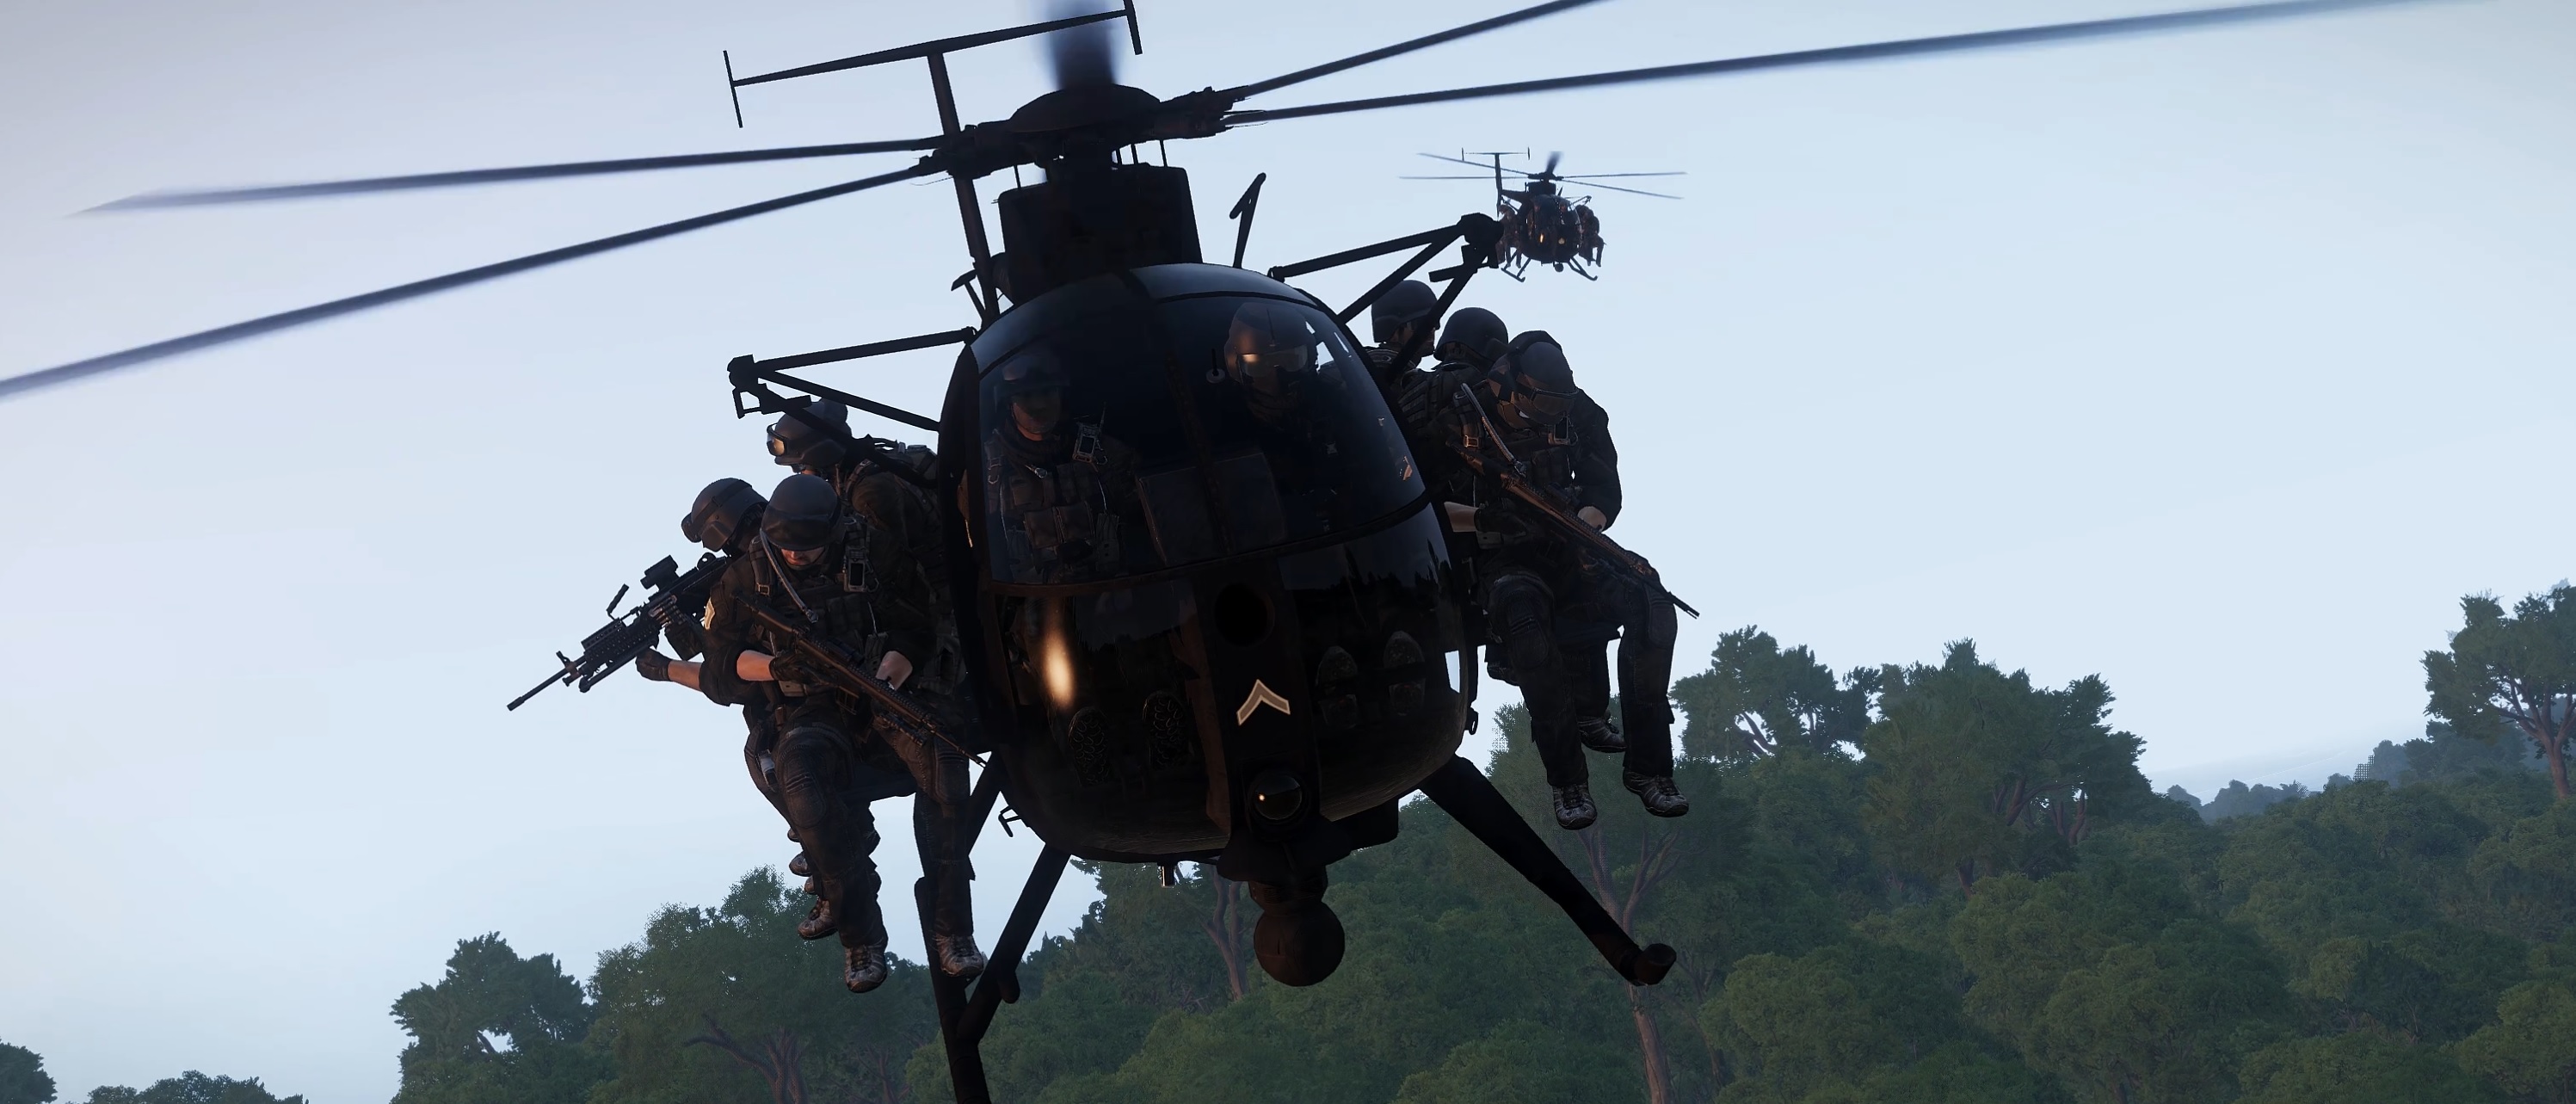 The best gaming war movies are still made in Arma 3